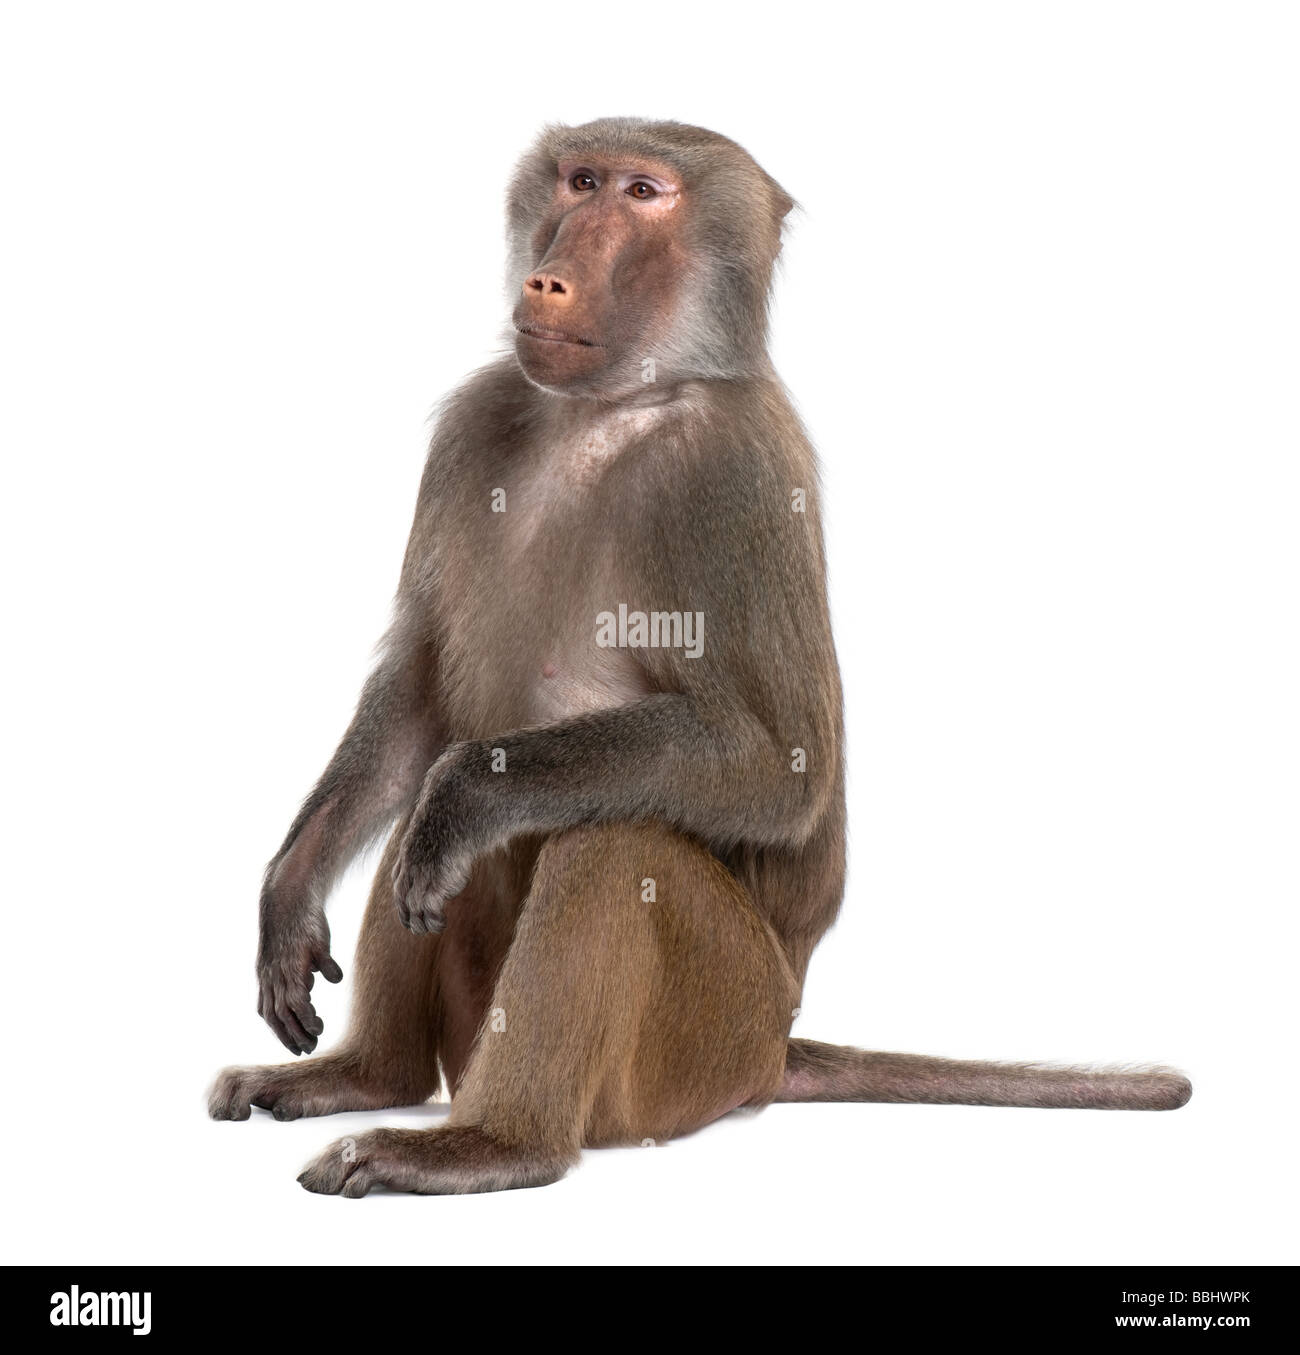 Baboon Simia hamadryas in front of a white background Stock Photo